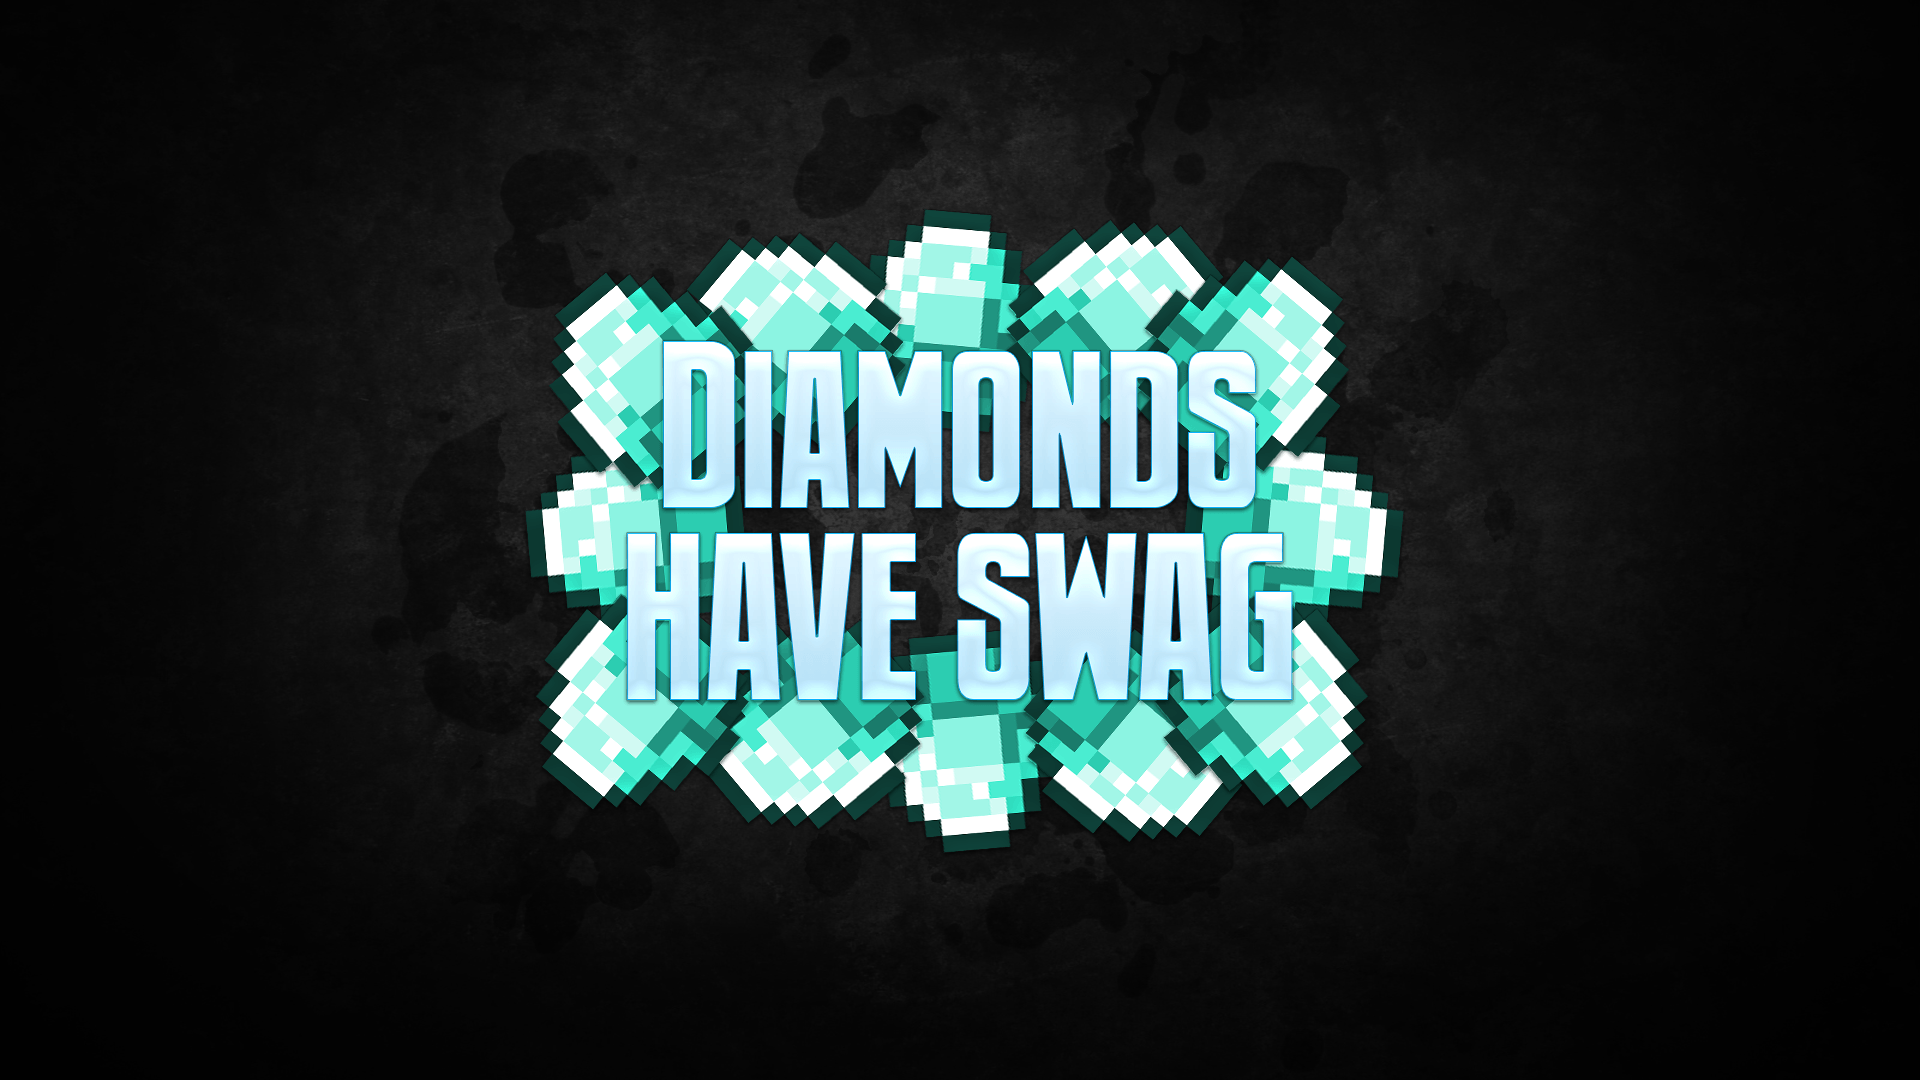 diamonds_have_swag_by_lightvidsofficial-d7om3u5